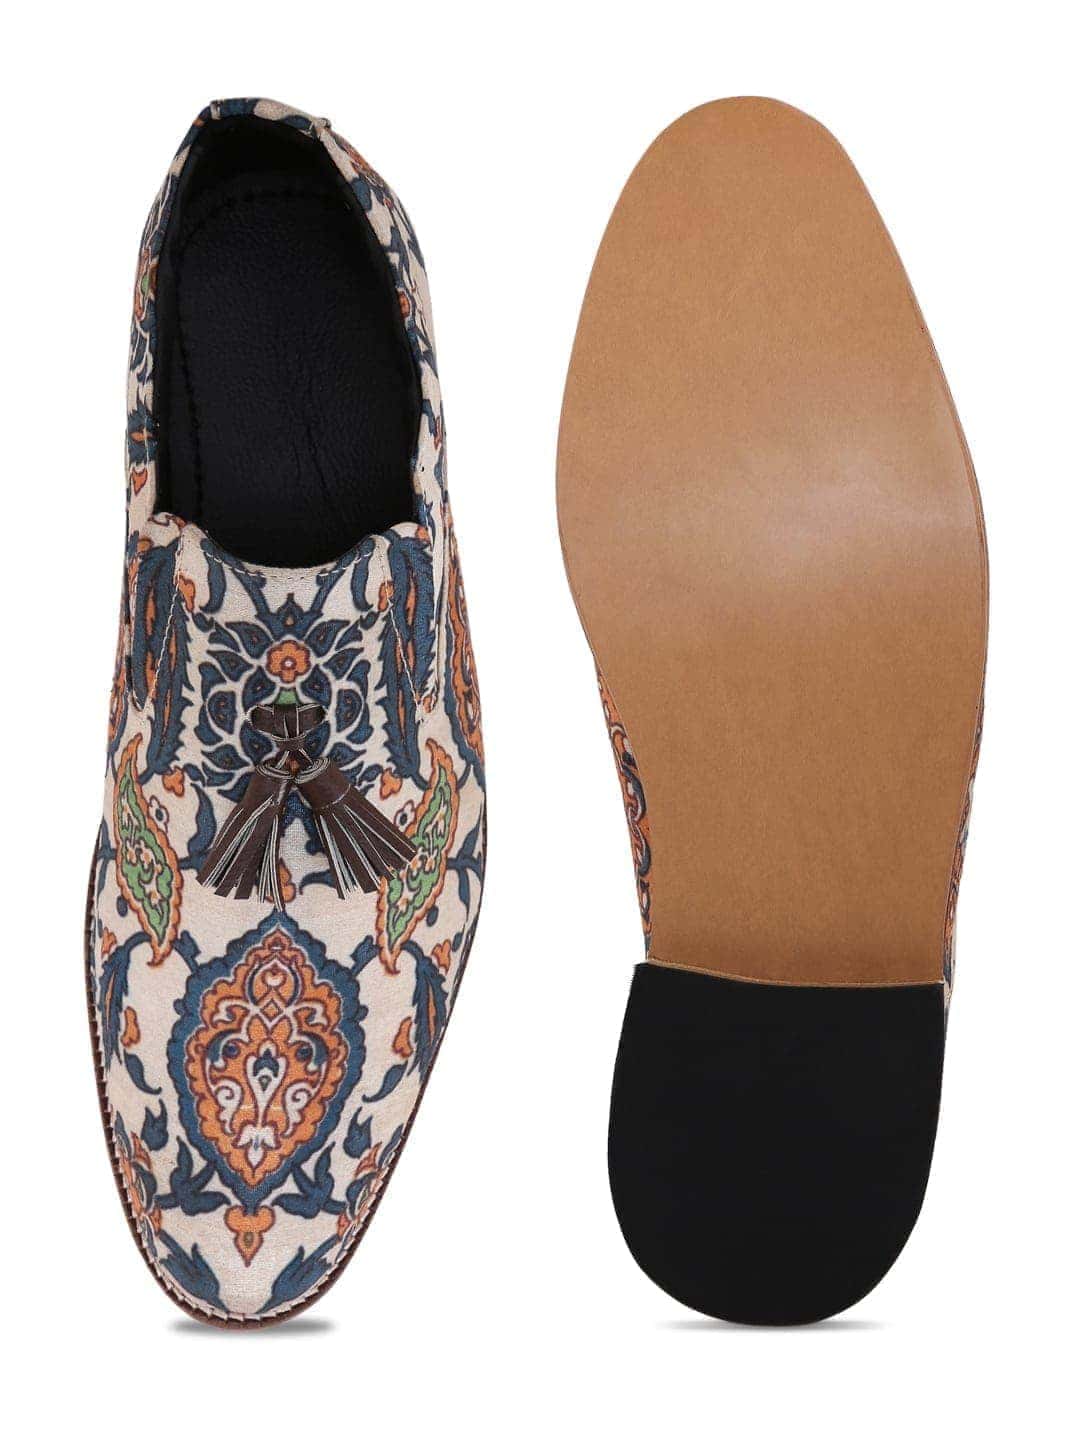 Royal Handcrafted Mughal Print Loafers